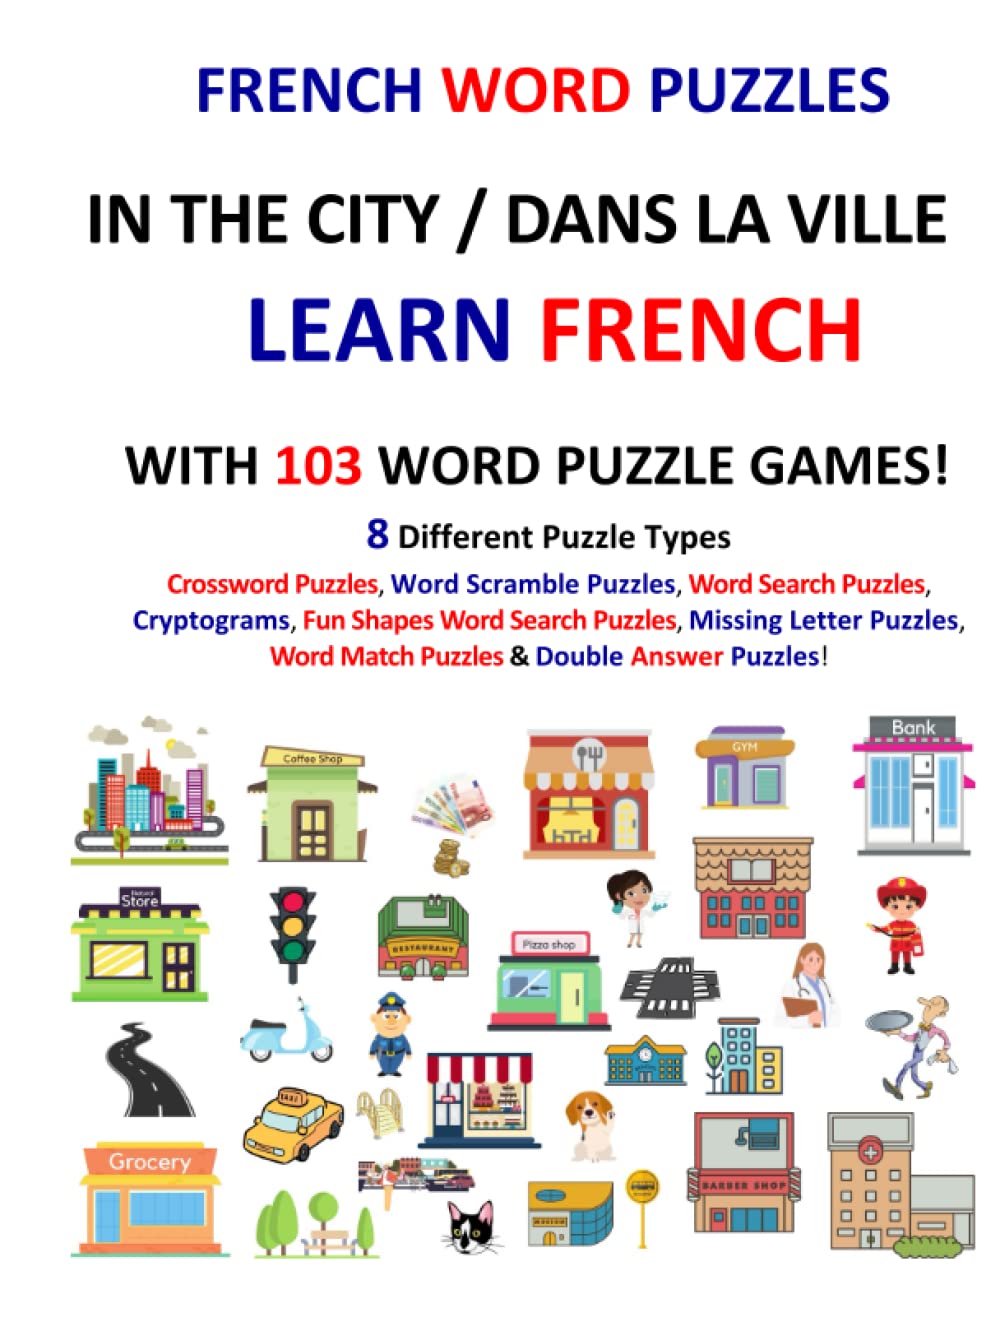 LEARN FRENCH with WORD PUZZLES: IN THE CITY / DANS LA VILLE: Crossword Puzzles, Word Scramble Puzzles, Word Search Puzzles, Cryptograms, Fun Shapes ... Word Match Puzzles & Double Answer Puzzles!